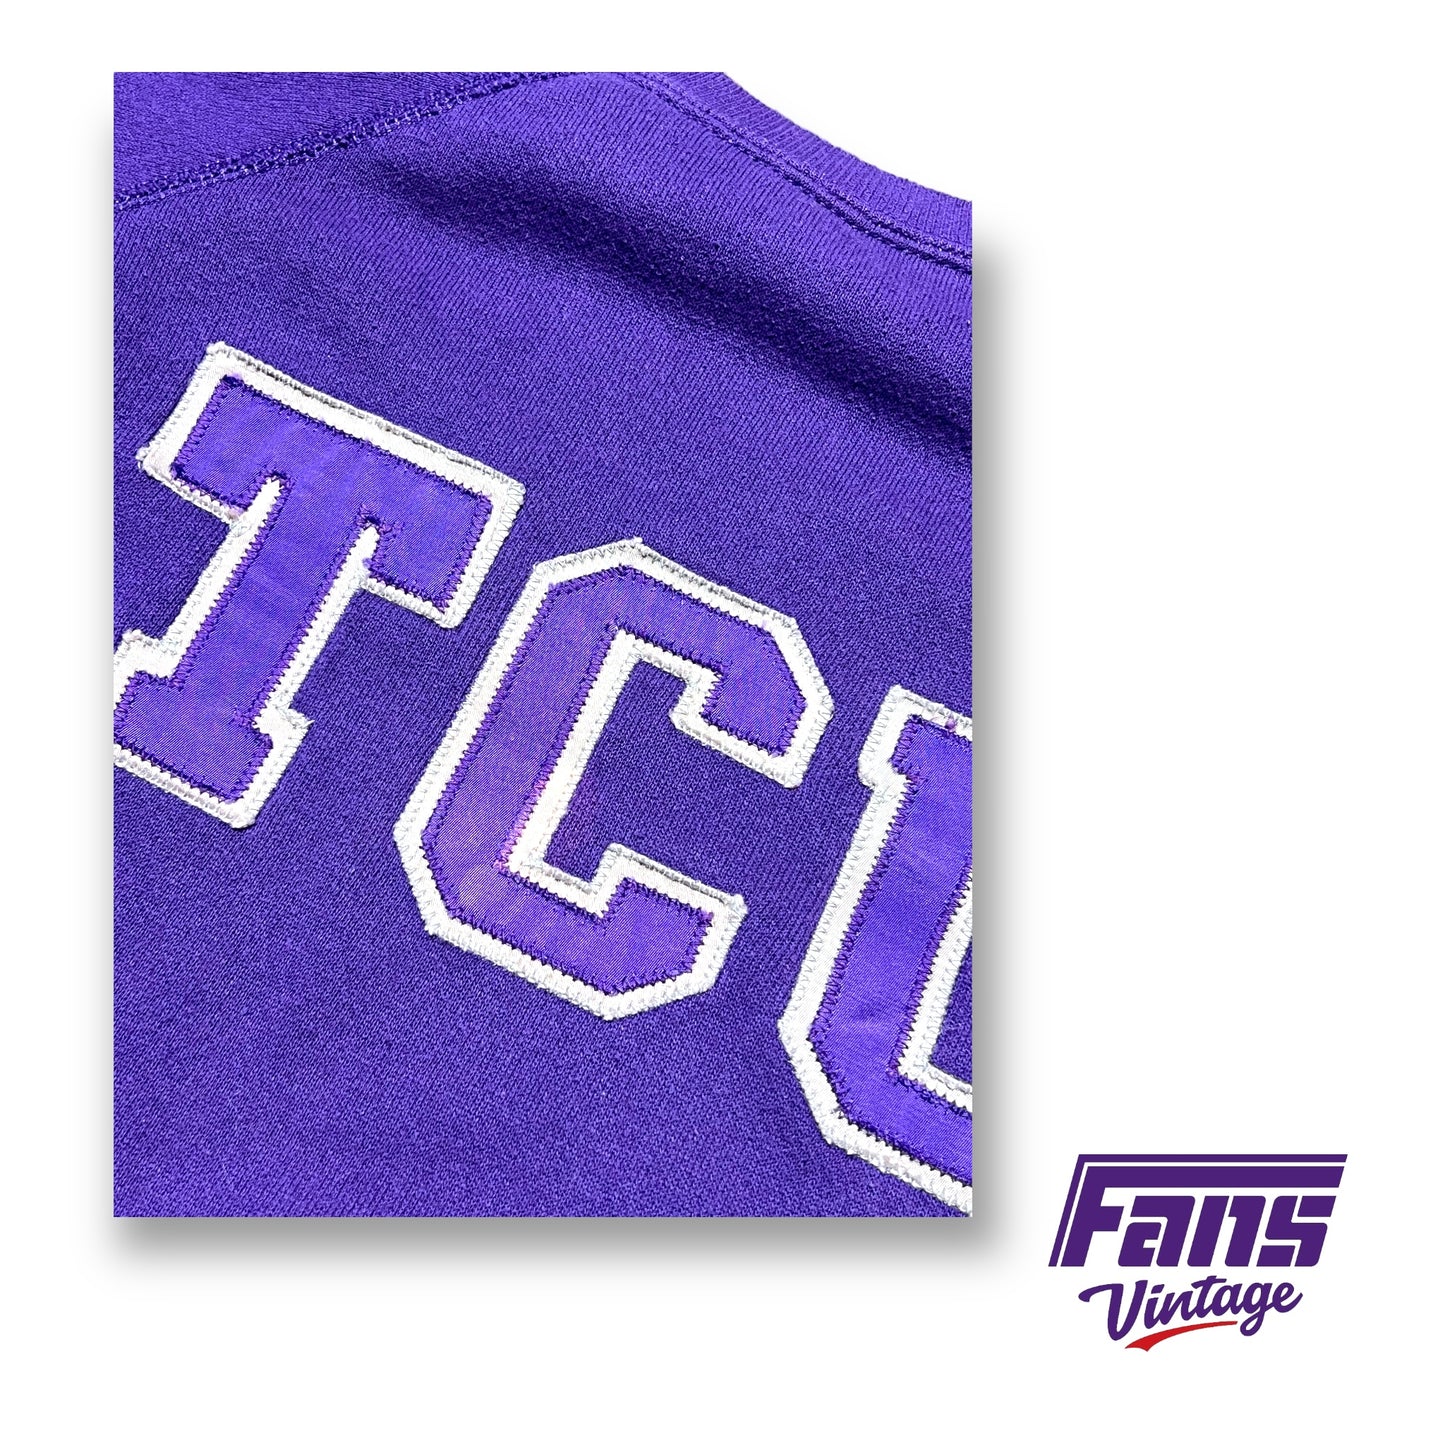 80s Vintage TCU Sweater - Awesome Raglan Crewneck with satin lettering!